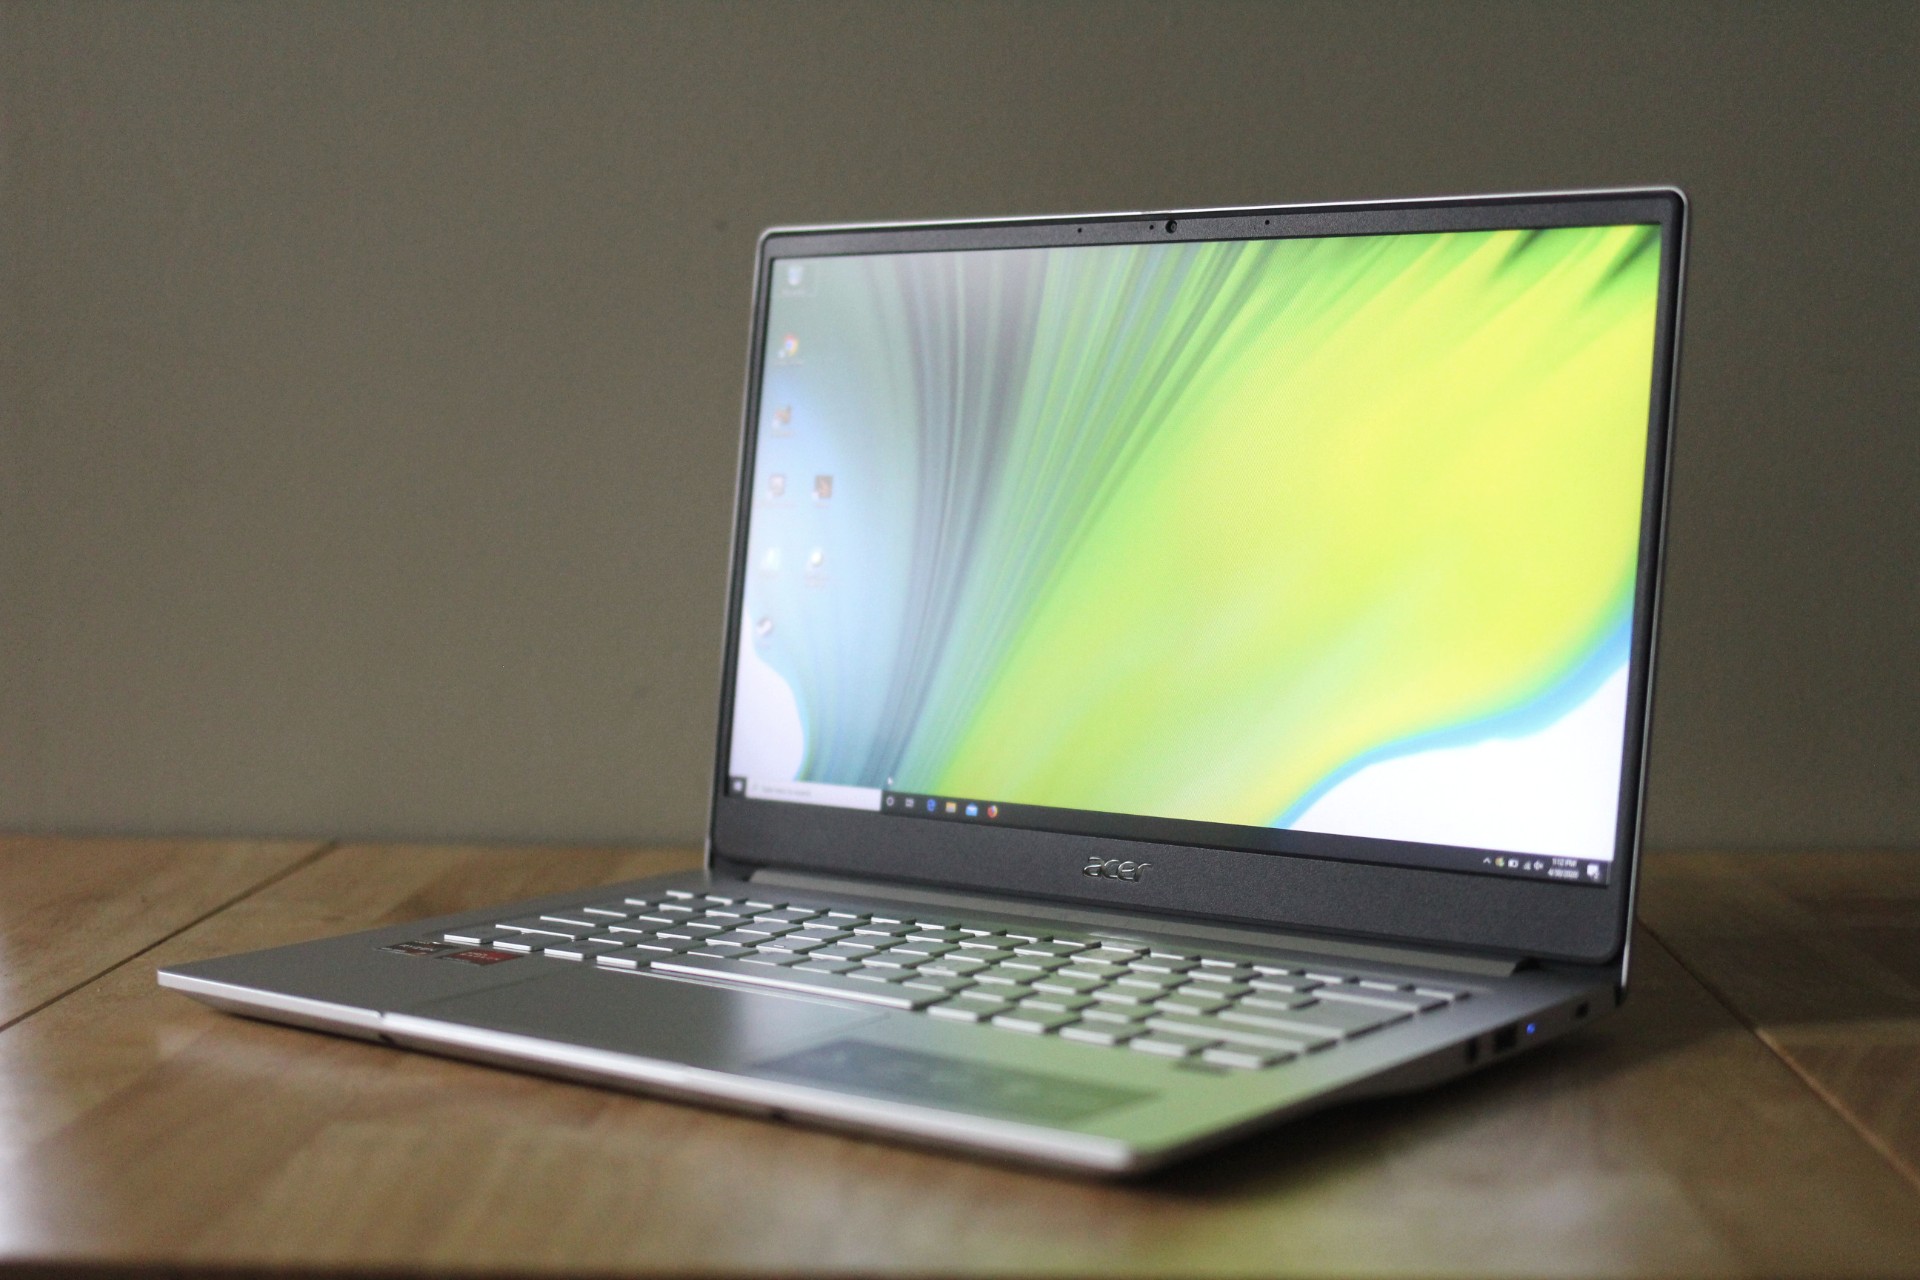 Acer Swift 3 Review: Ryzen 4000 delivers insane performance for the price